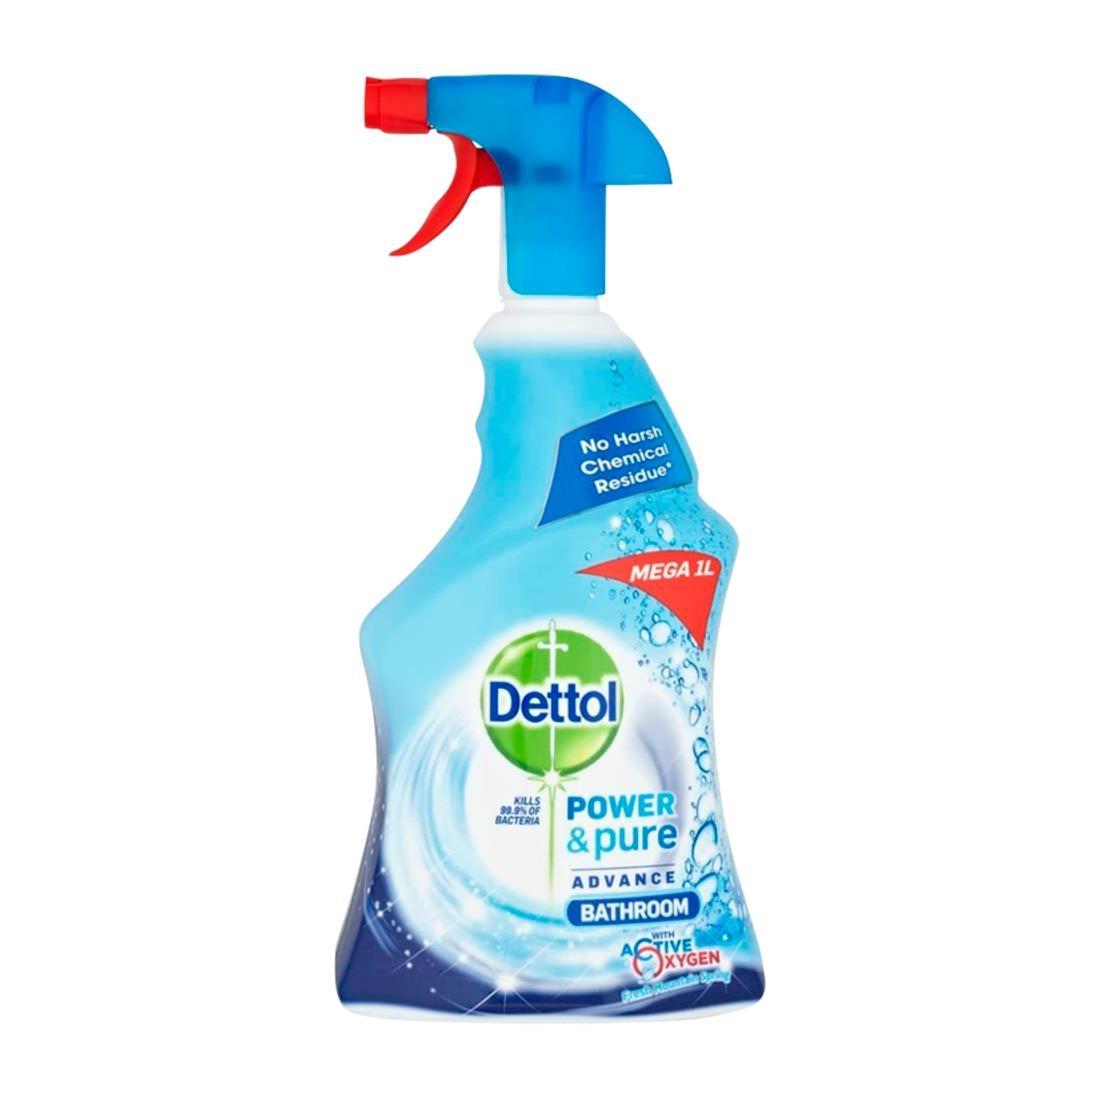 Dettol Power and Pure Advance Bathroom Cleaner Ready To Use 1Ltr - FT019  - 1